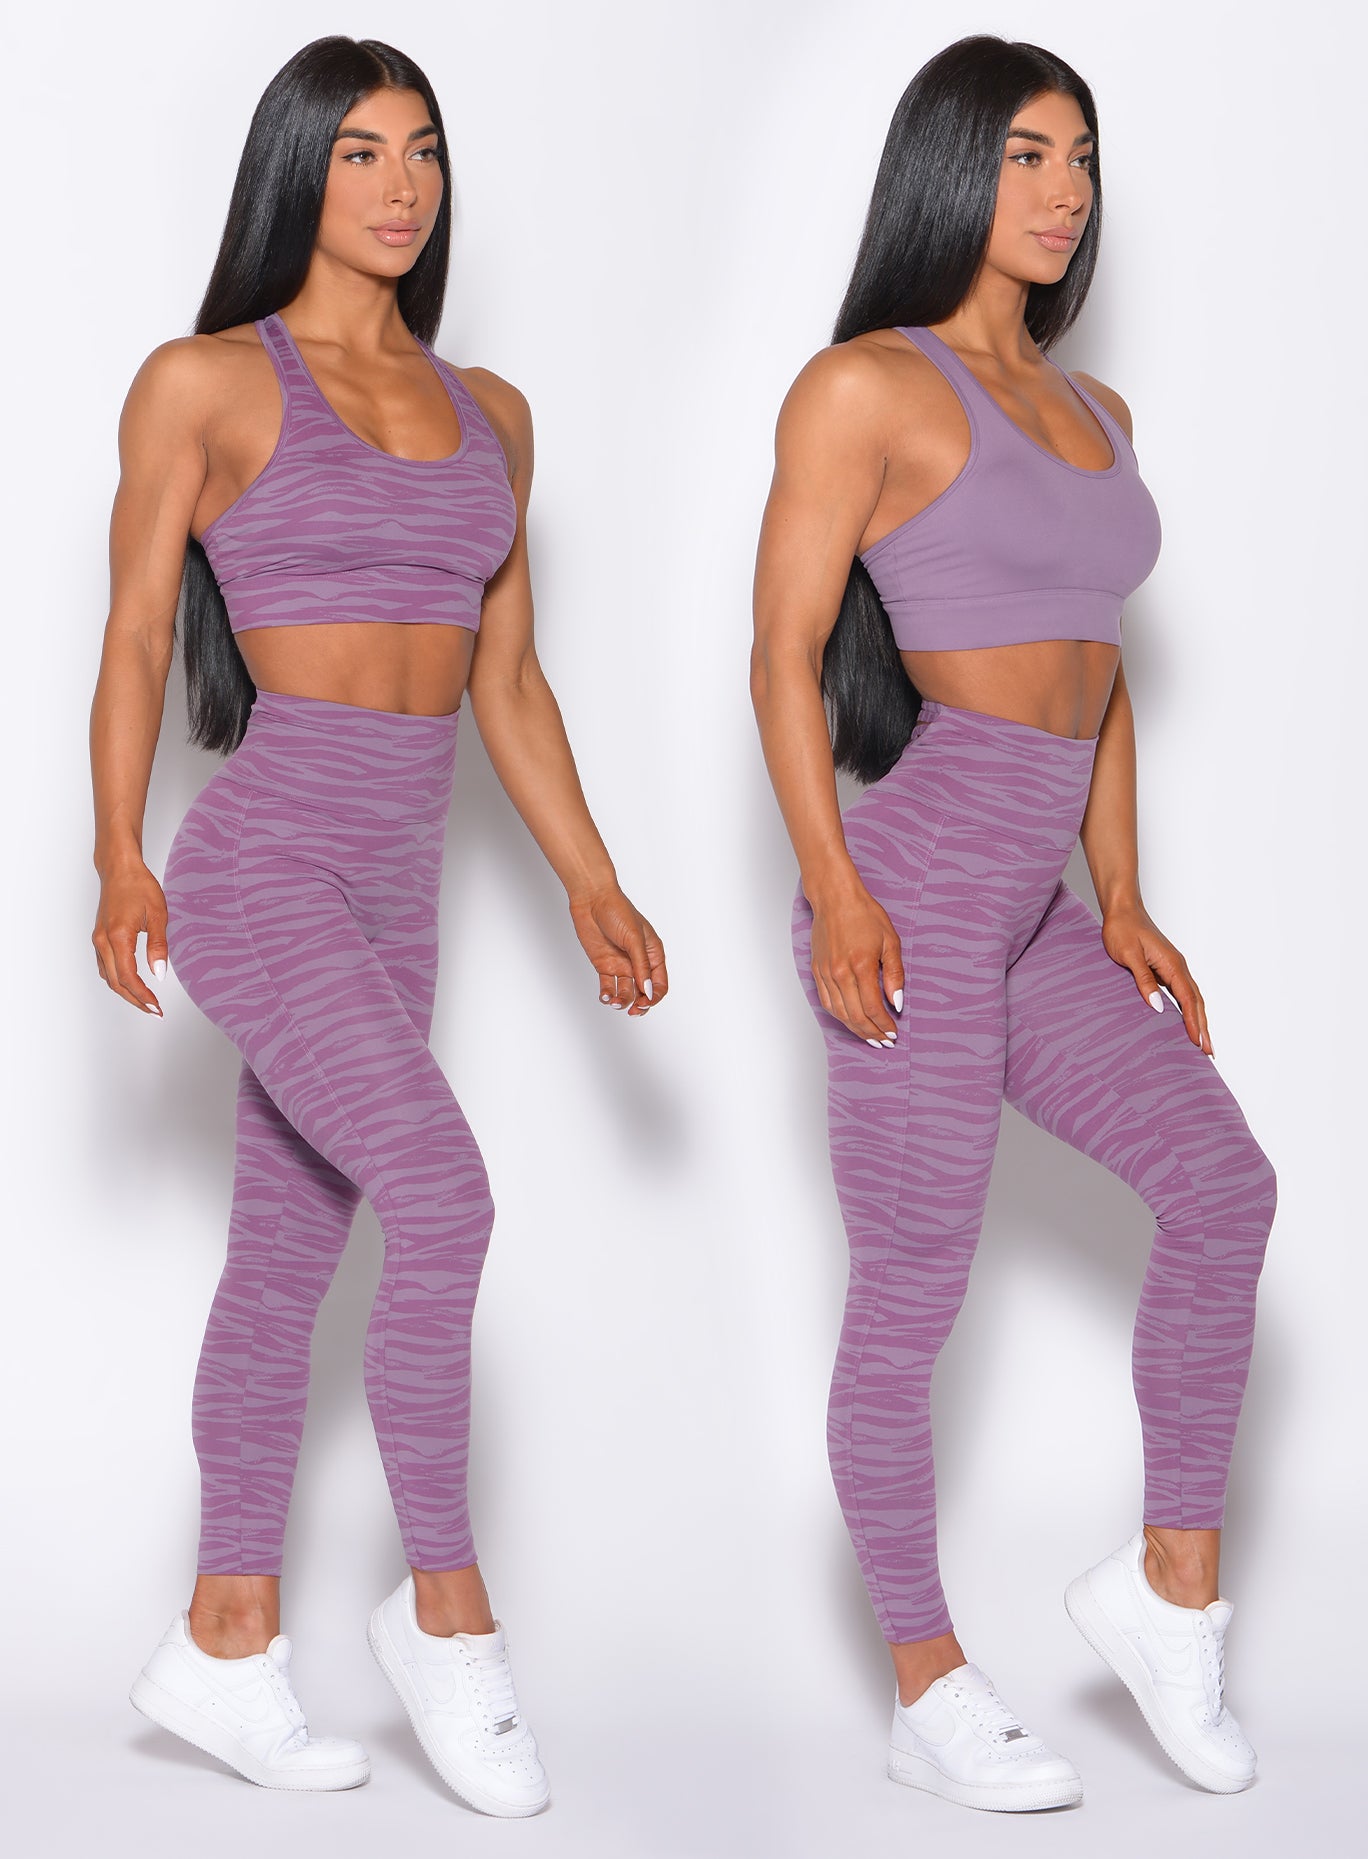 Two pictures of a model wearing our sexy back leggings in orchid purple color along with two matching bras 